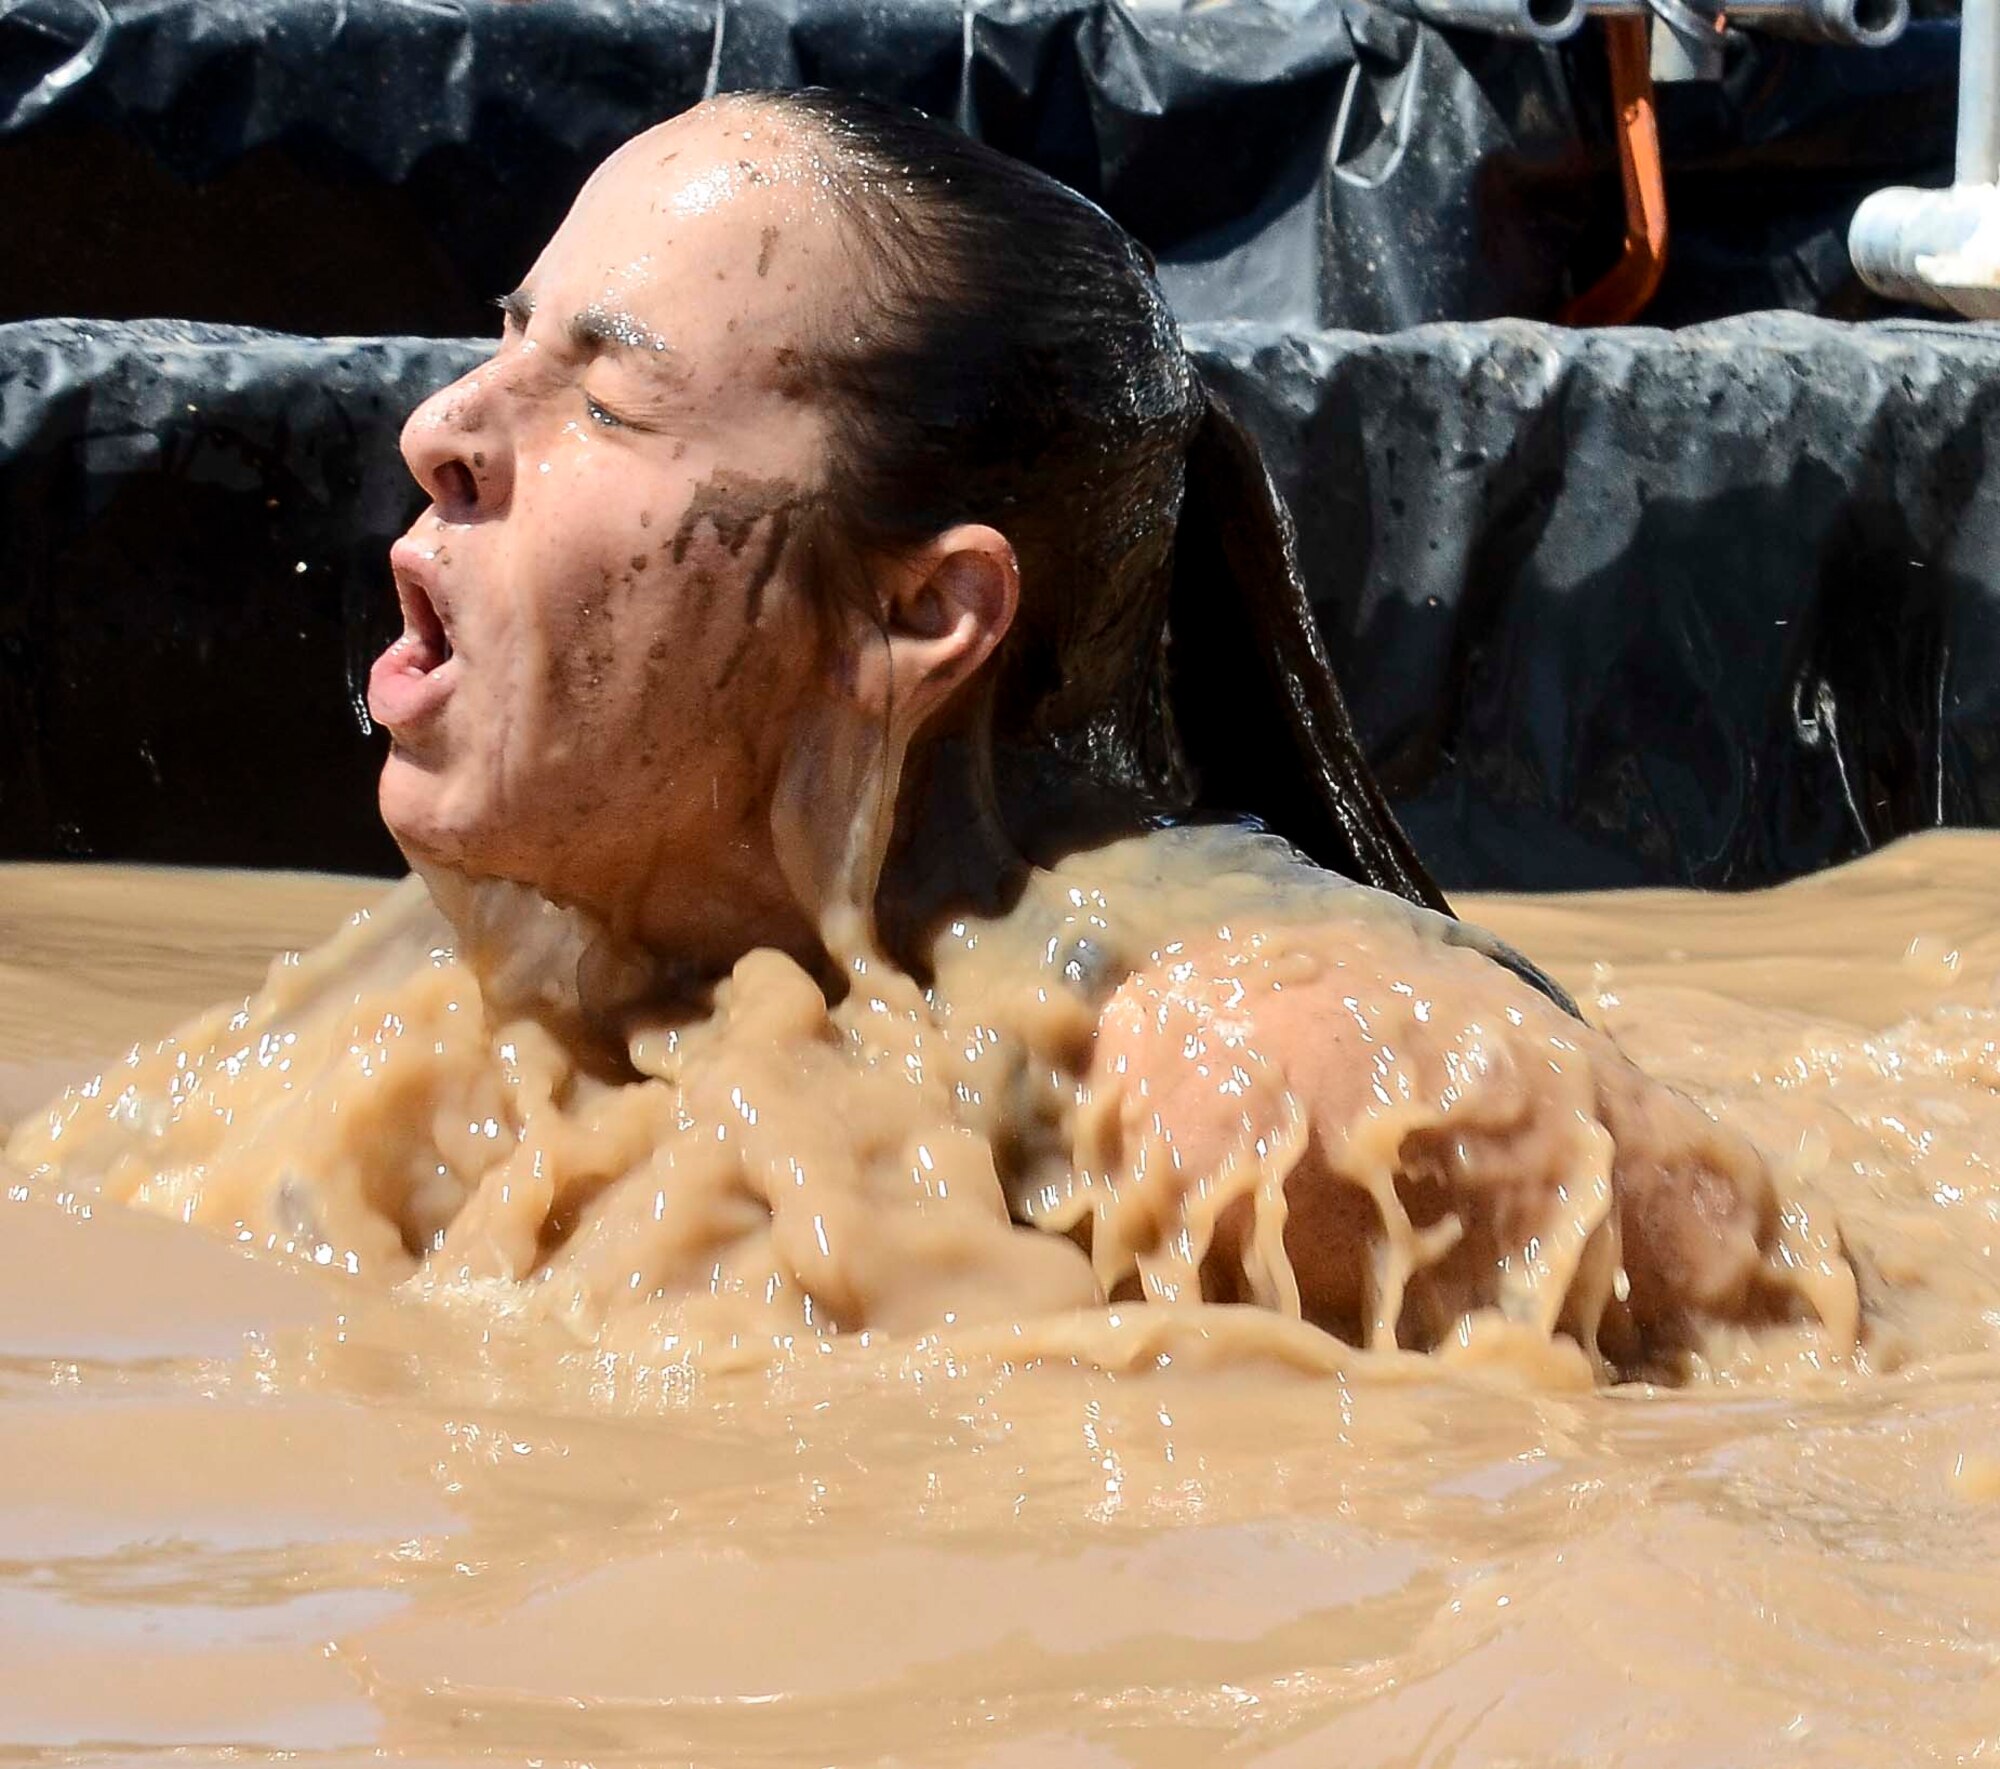 Master Sgt. Larita Trudell, 12th Air Force (Air Forces Southern) Commander Support Staff Superintendent, emerges from underneath water during a portion of the Hard Charge Televised Obstacle Mission at the Pima County Fairgrounds in Tucson, Ariz., on March 29. Climbing, crawling and sprinting were a few of the many ways the members form 12th AF passed though the rigorous four-mile 37-obstacle course. (U.S. Air Force photo by Staff Sgt. Adam Grant/Released)